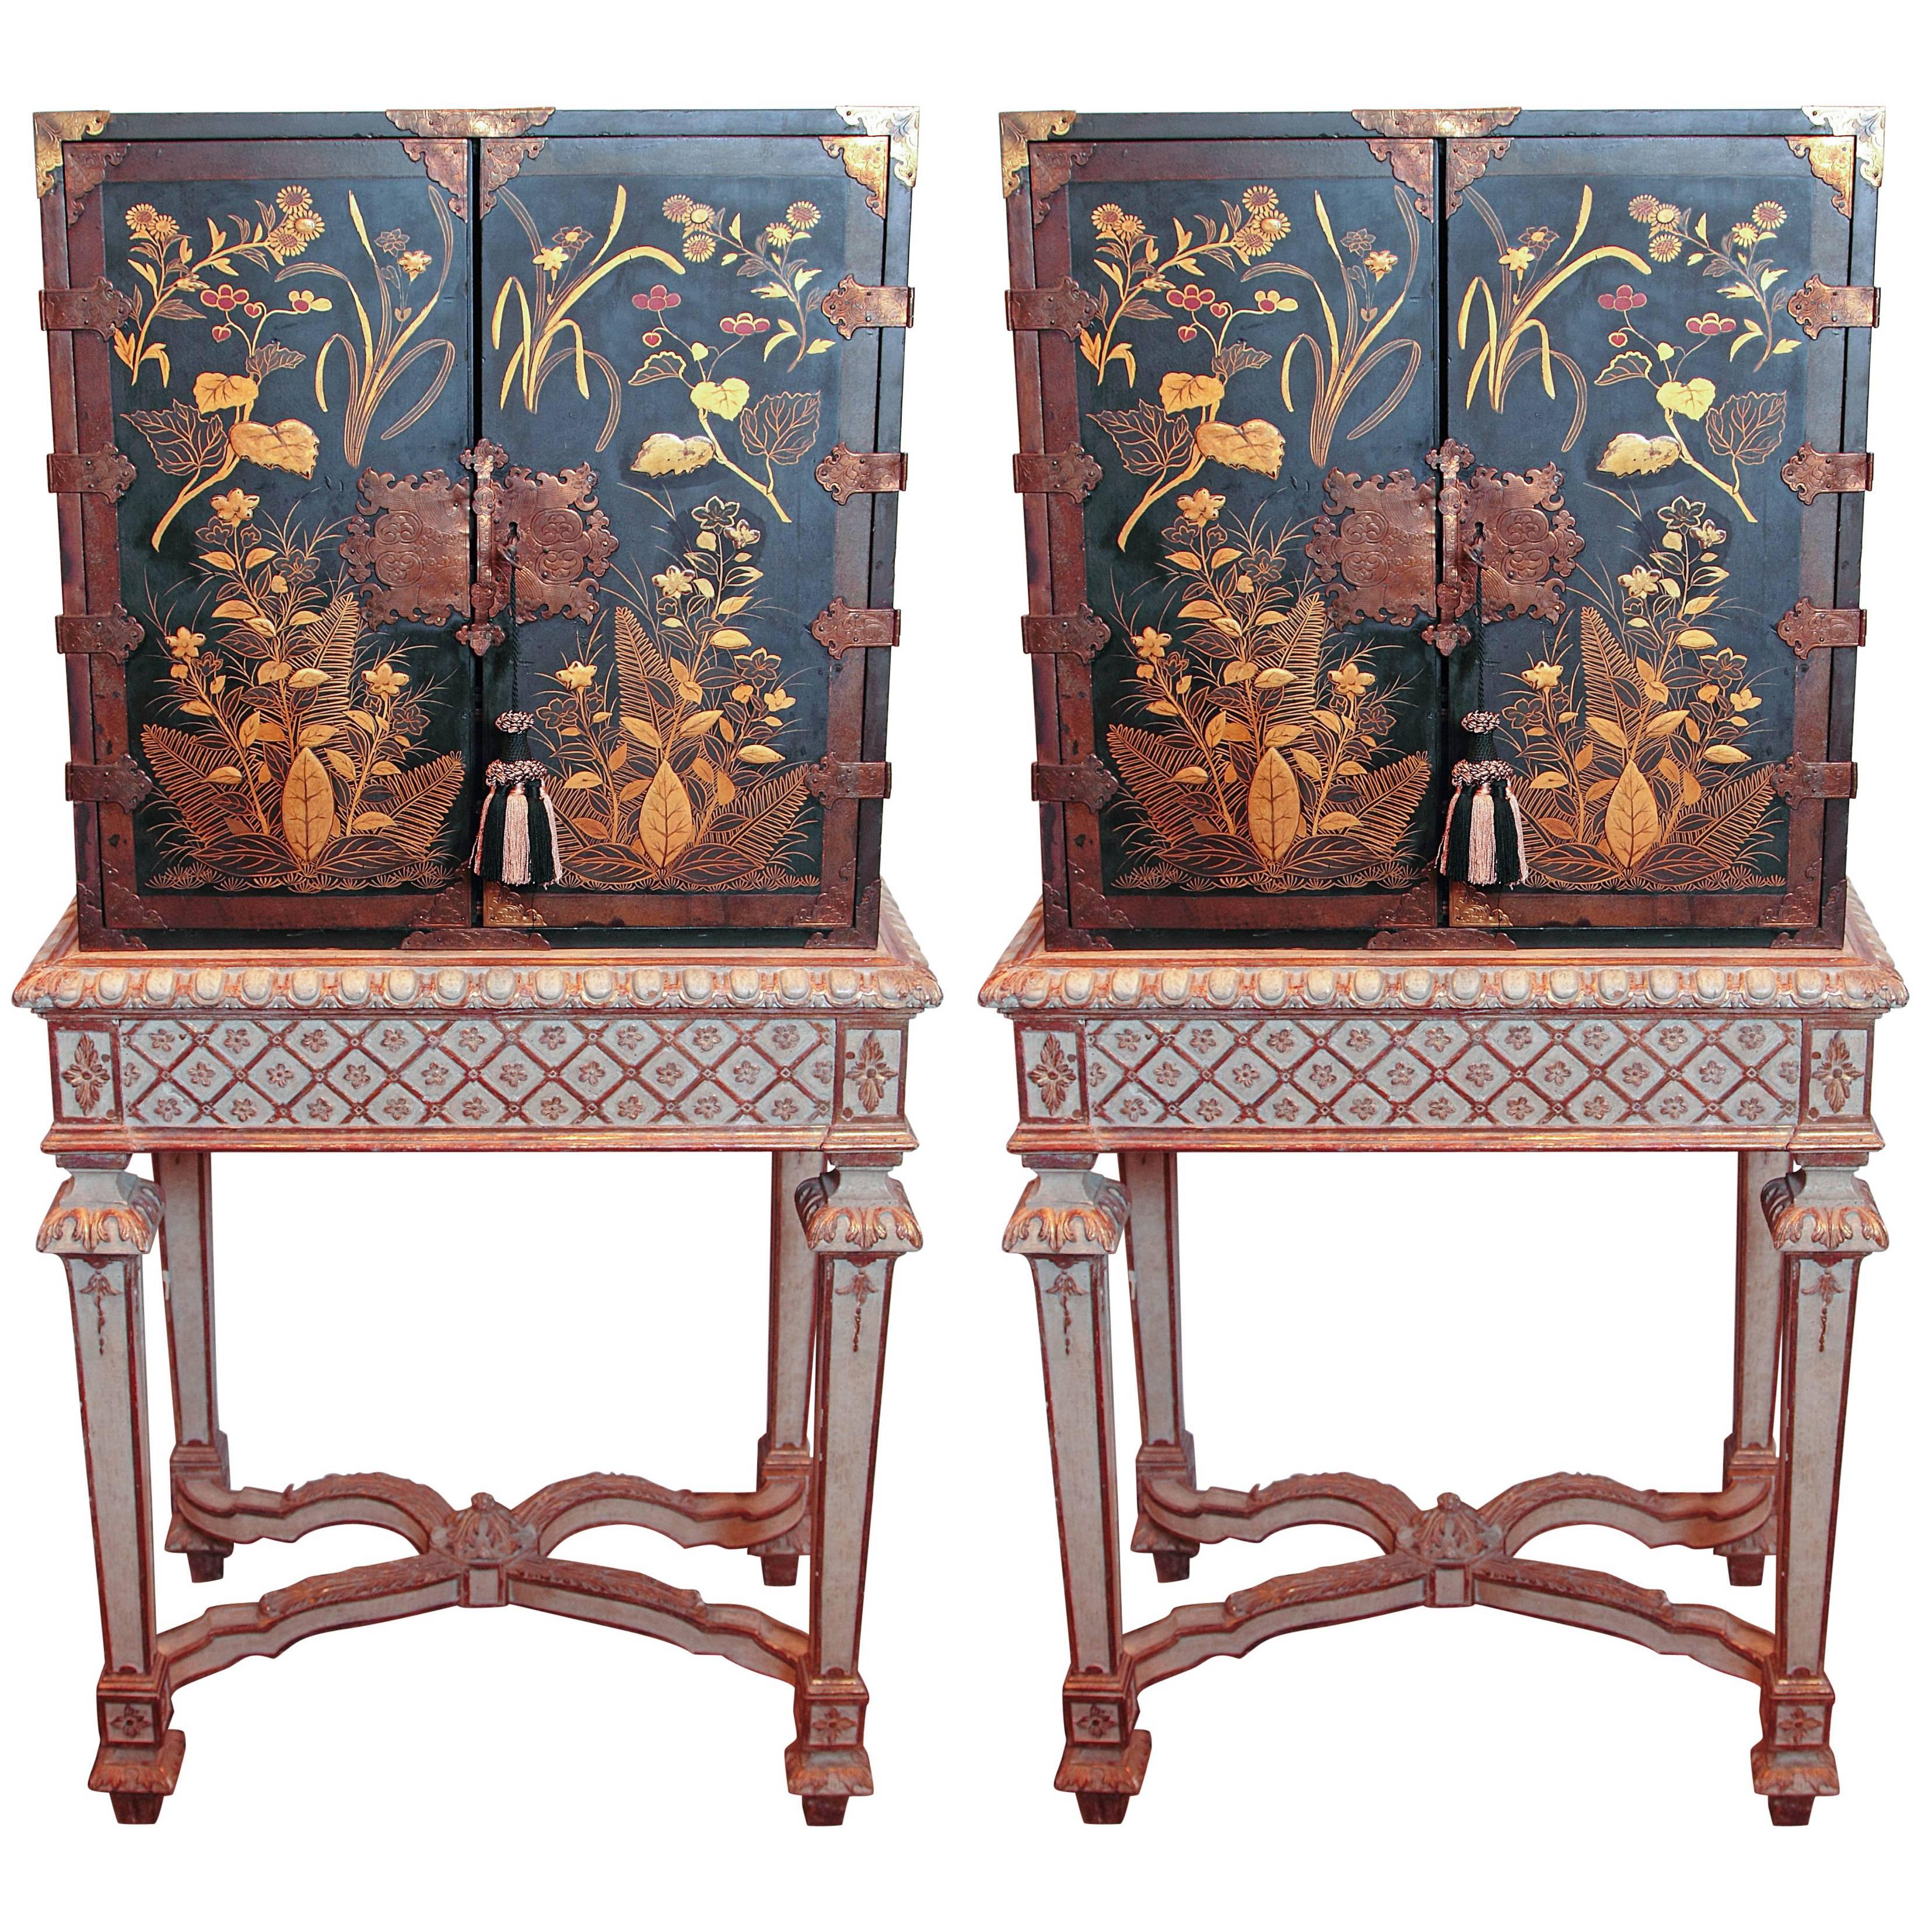 19th Century English Japanned Black Lacquered Cabinets on Stands